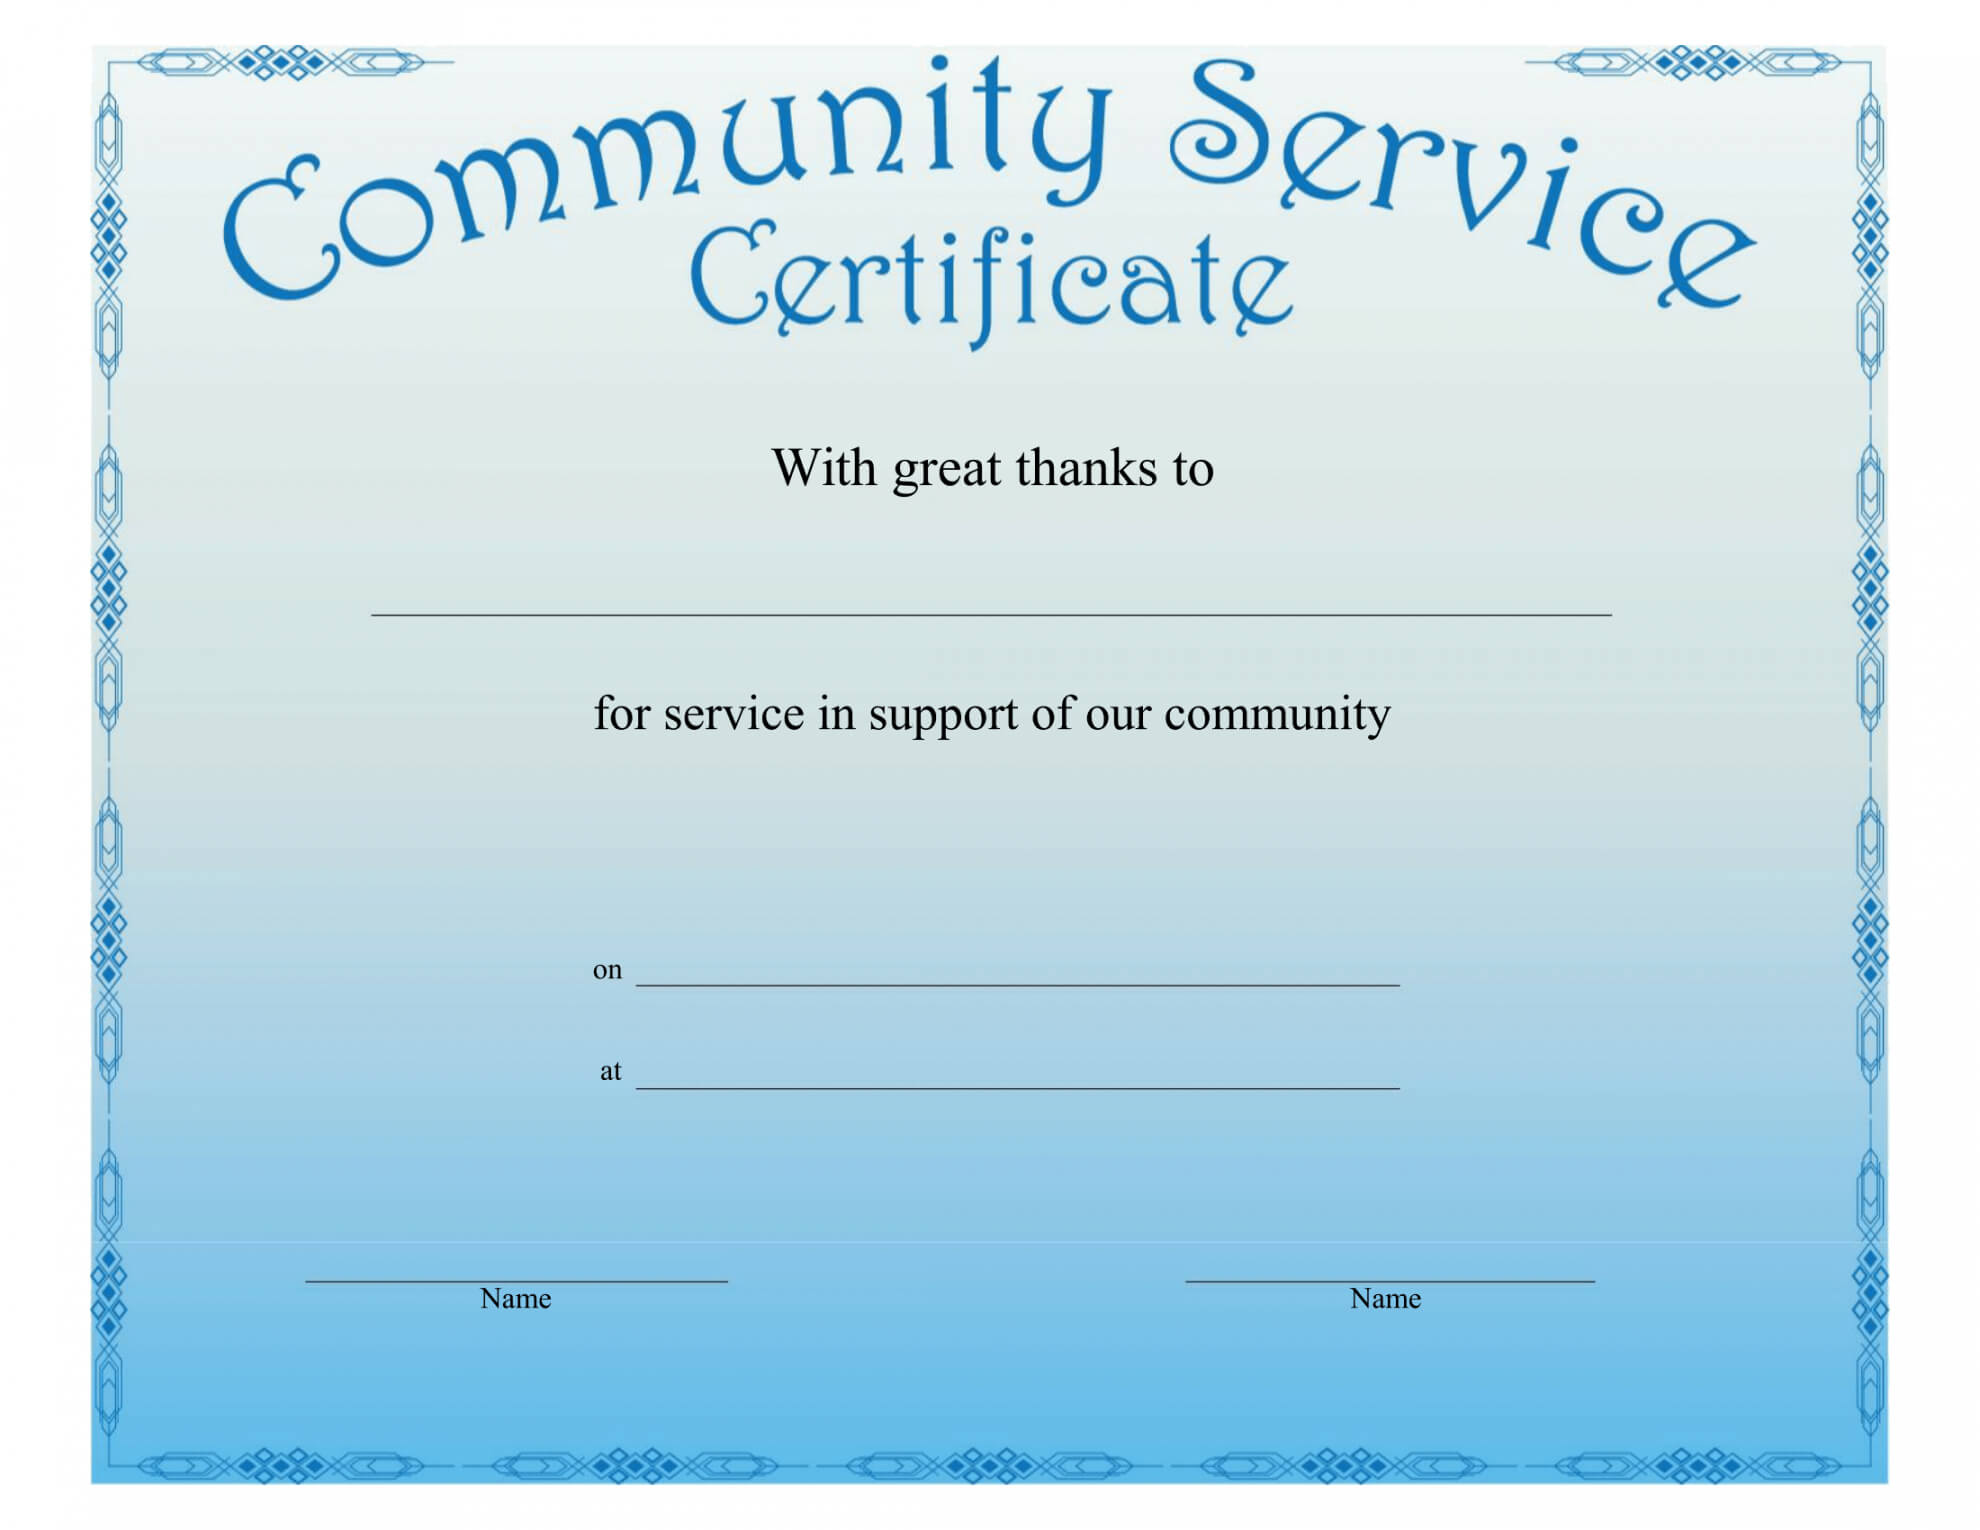 Community Service Certificate Template Pertaining To This Certificate Entitles The Bearer To Template